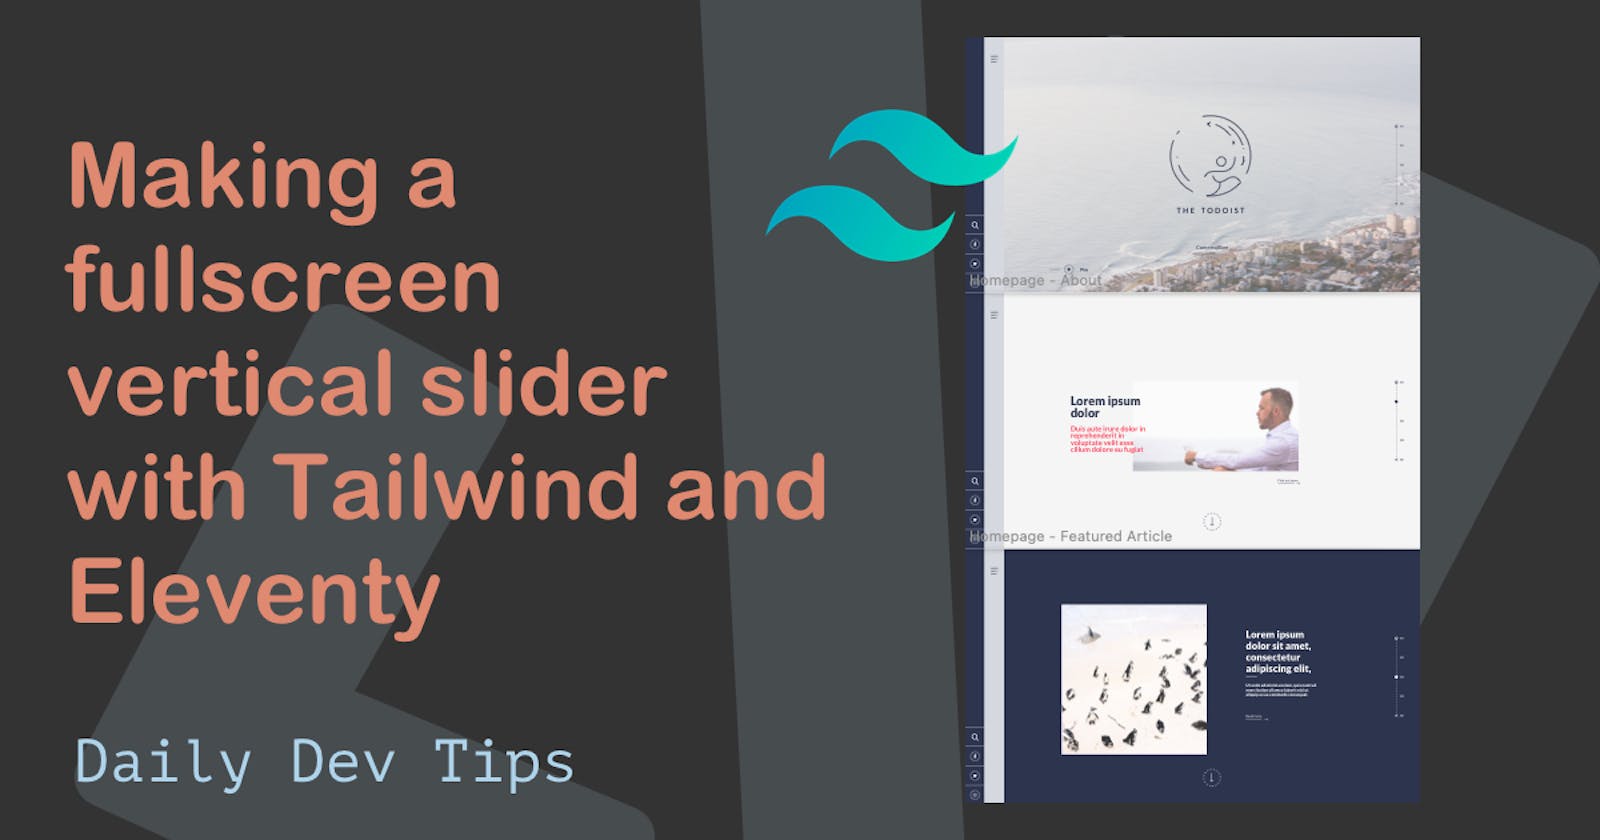 Making a fullscreen vertical slider with Tailwind and Eleventy